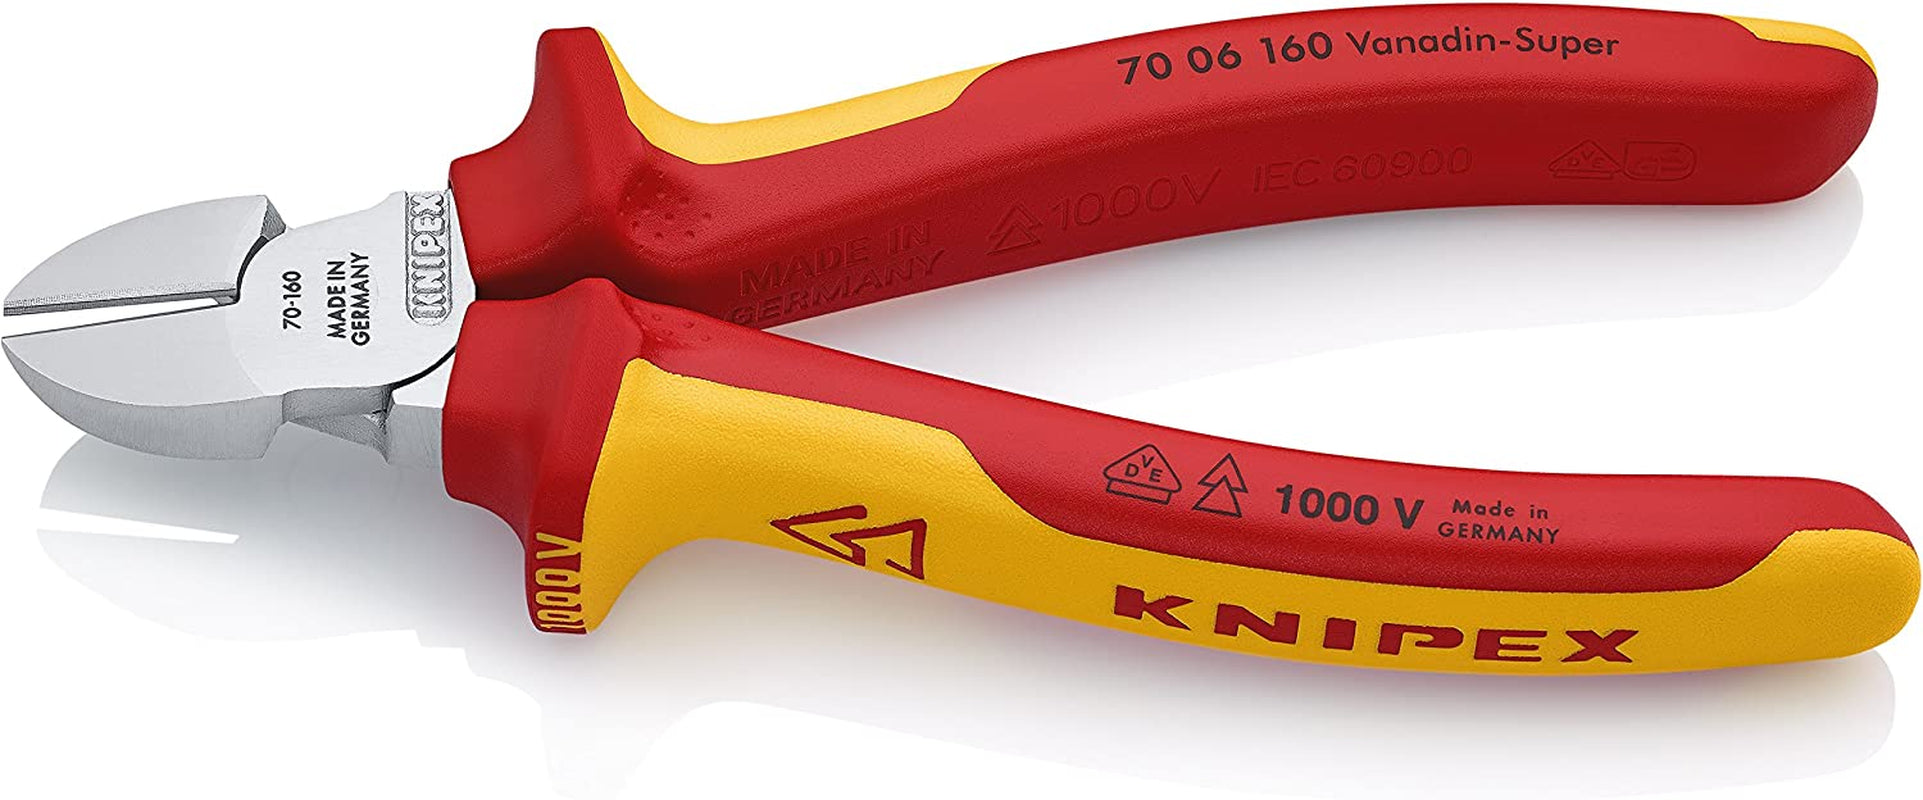 KNIPEX, KNIPEX 70 06 160 Diagonal Cutter Chrome Plated Insulated with Multi-Component Grips, Vde-Tested 160 Mm